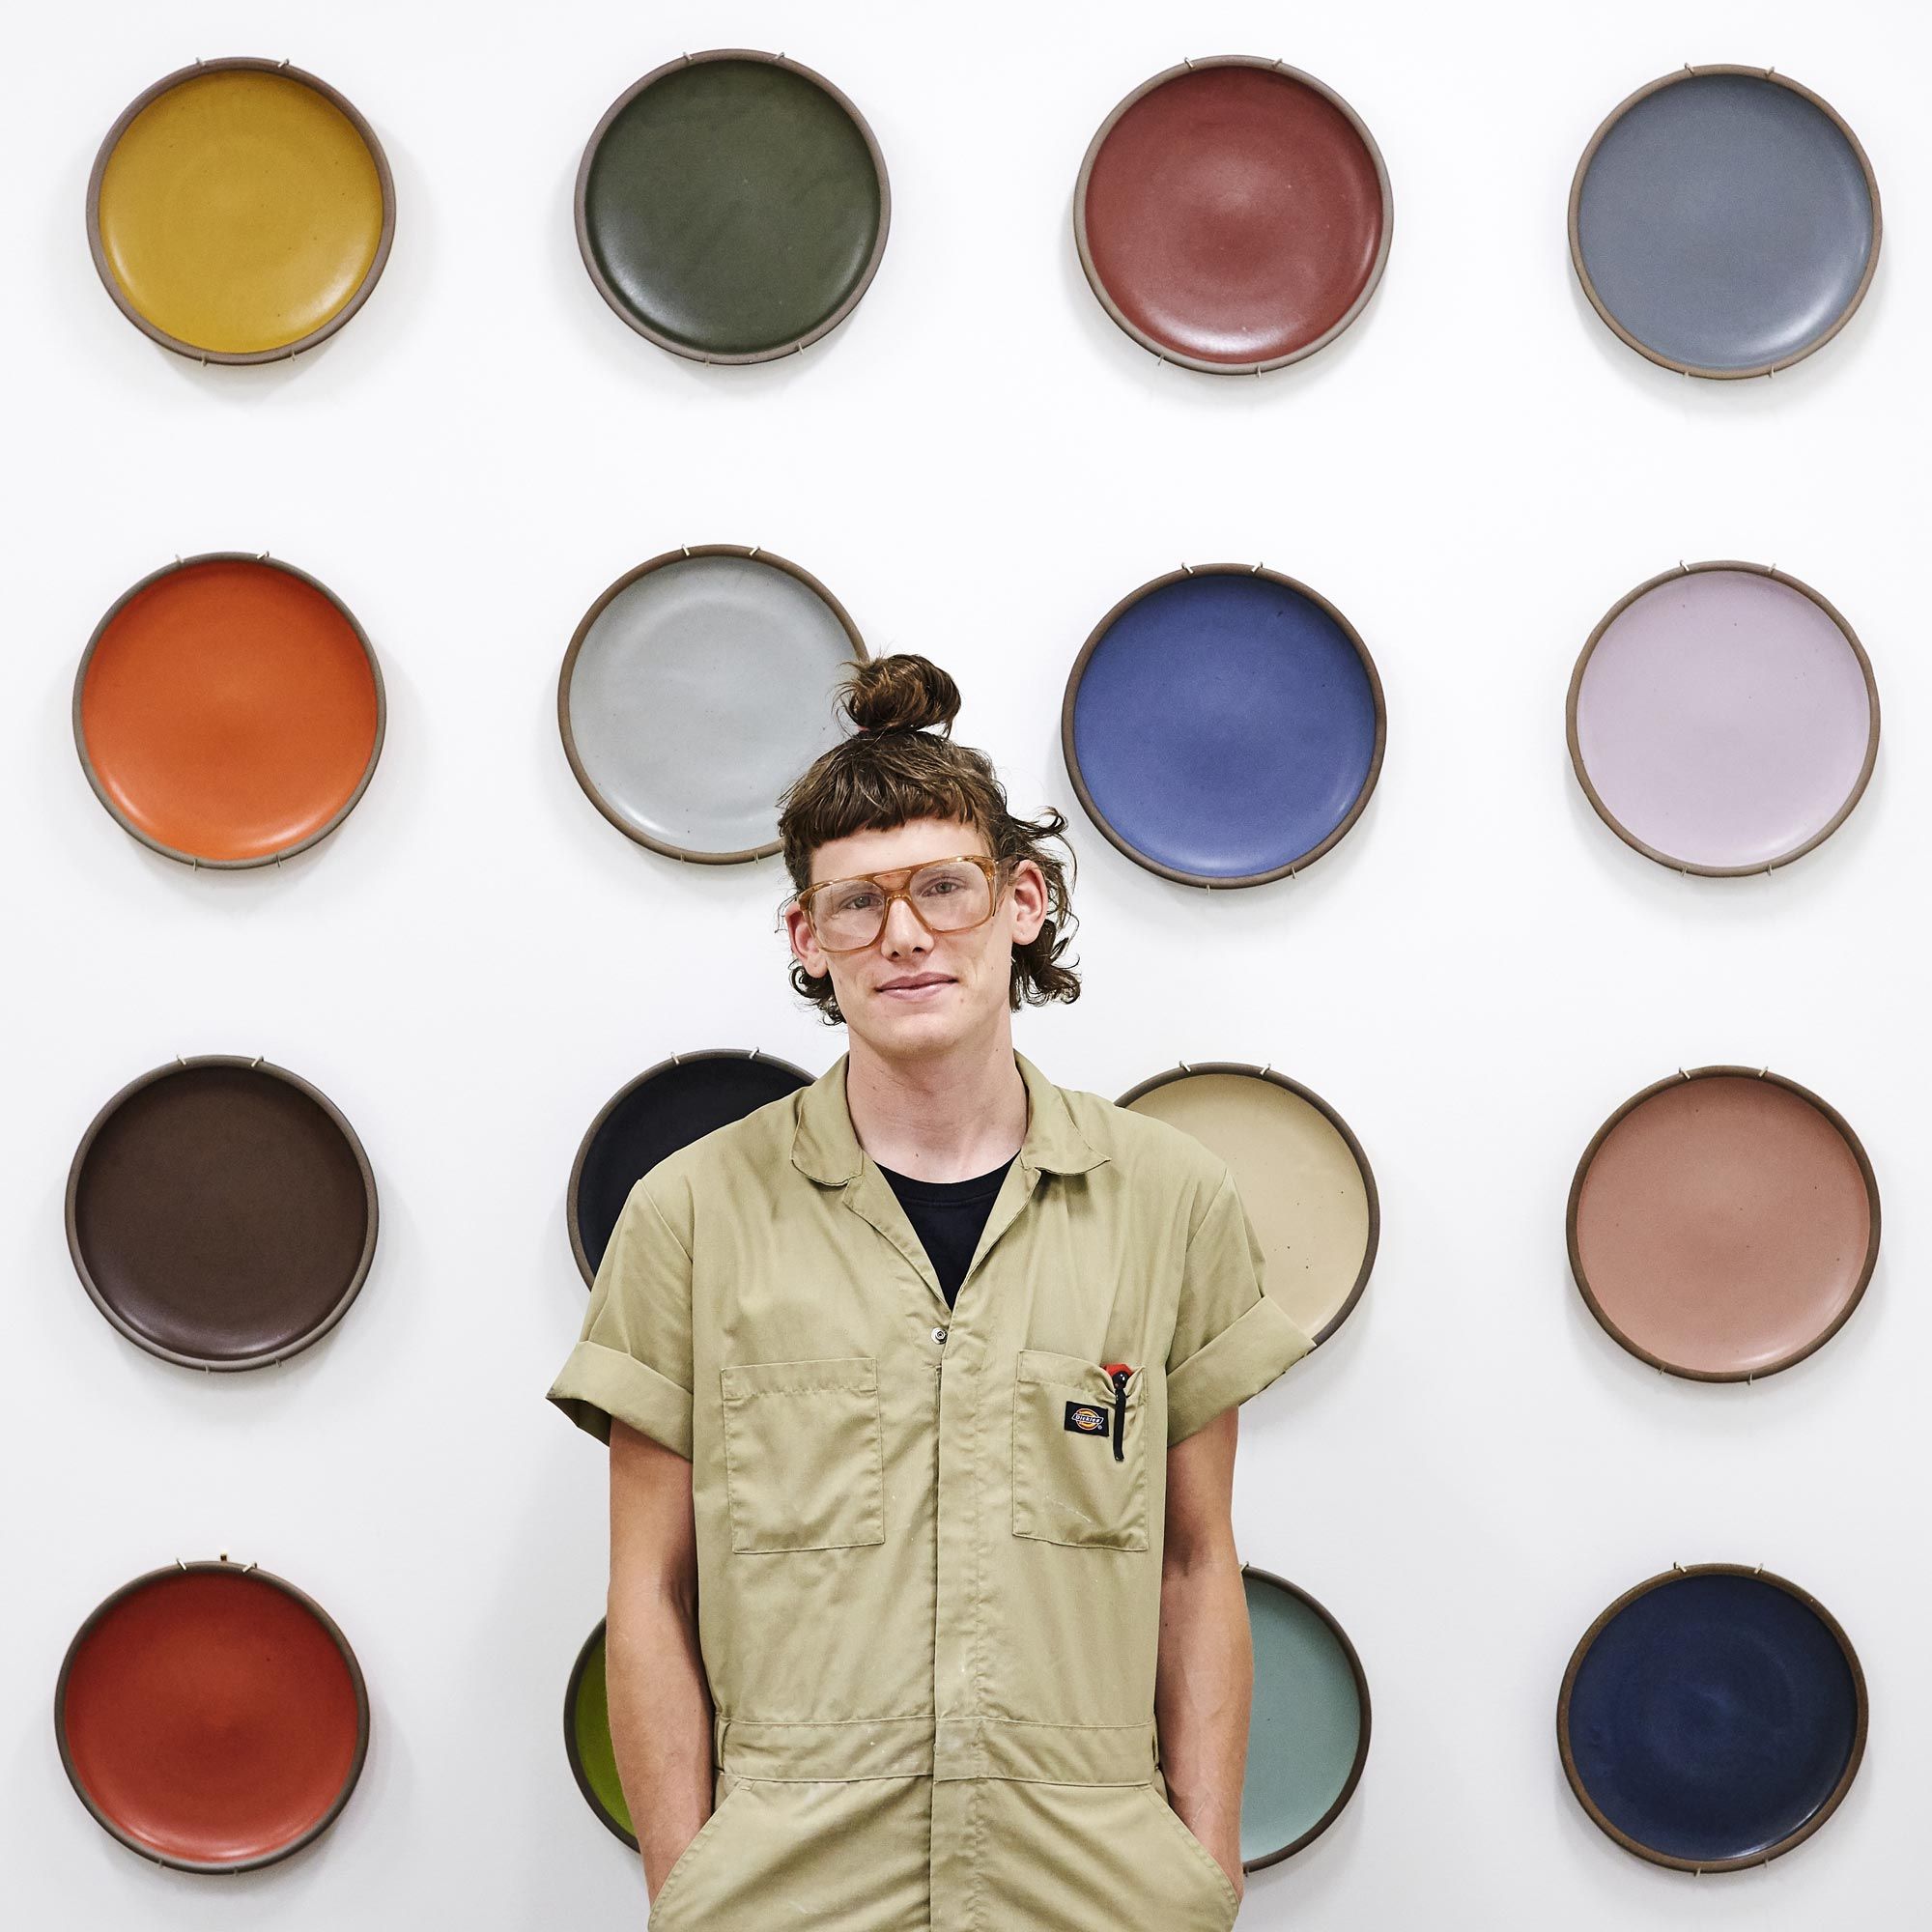 Kyle Crowder in front of glaze plate wall